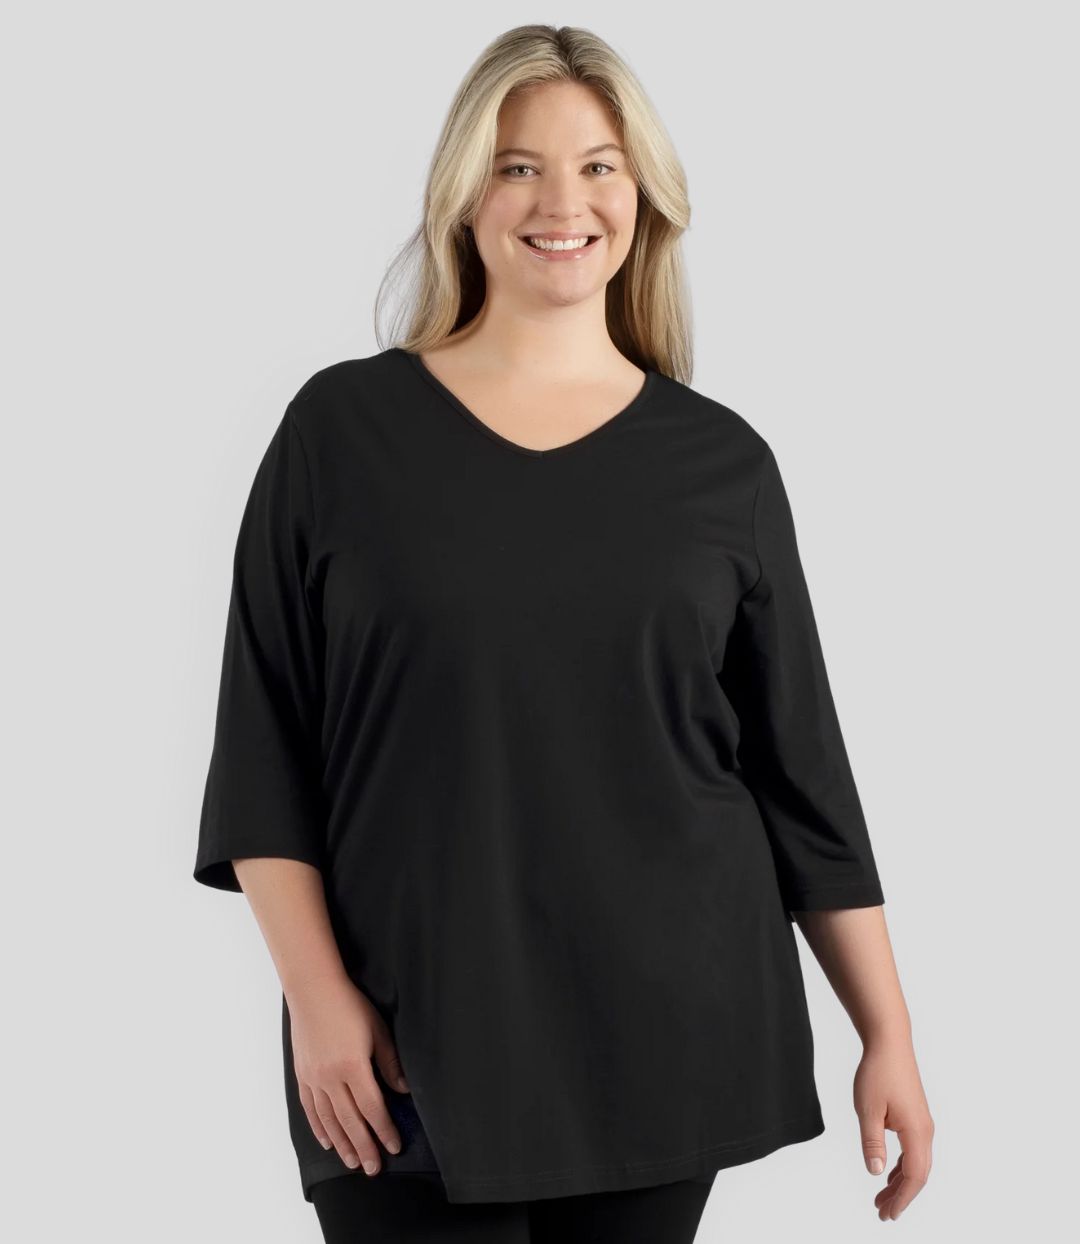 Plus size woman, facing front, wearing JunoActive’s Stretch Naturals Lite 3/4 Sleeve V-neck Tunic, color black. Arms by side.